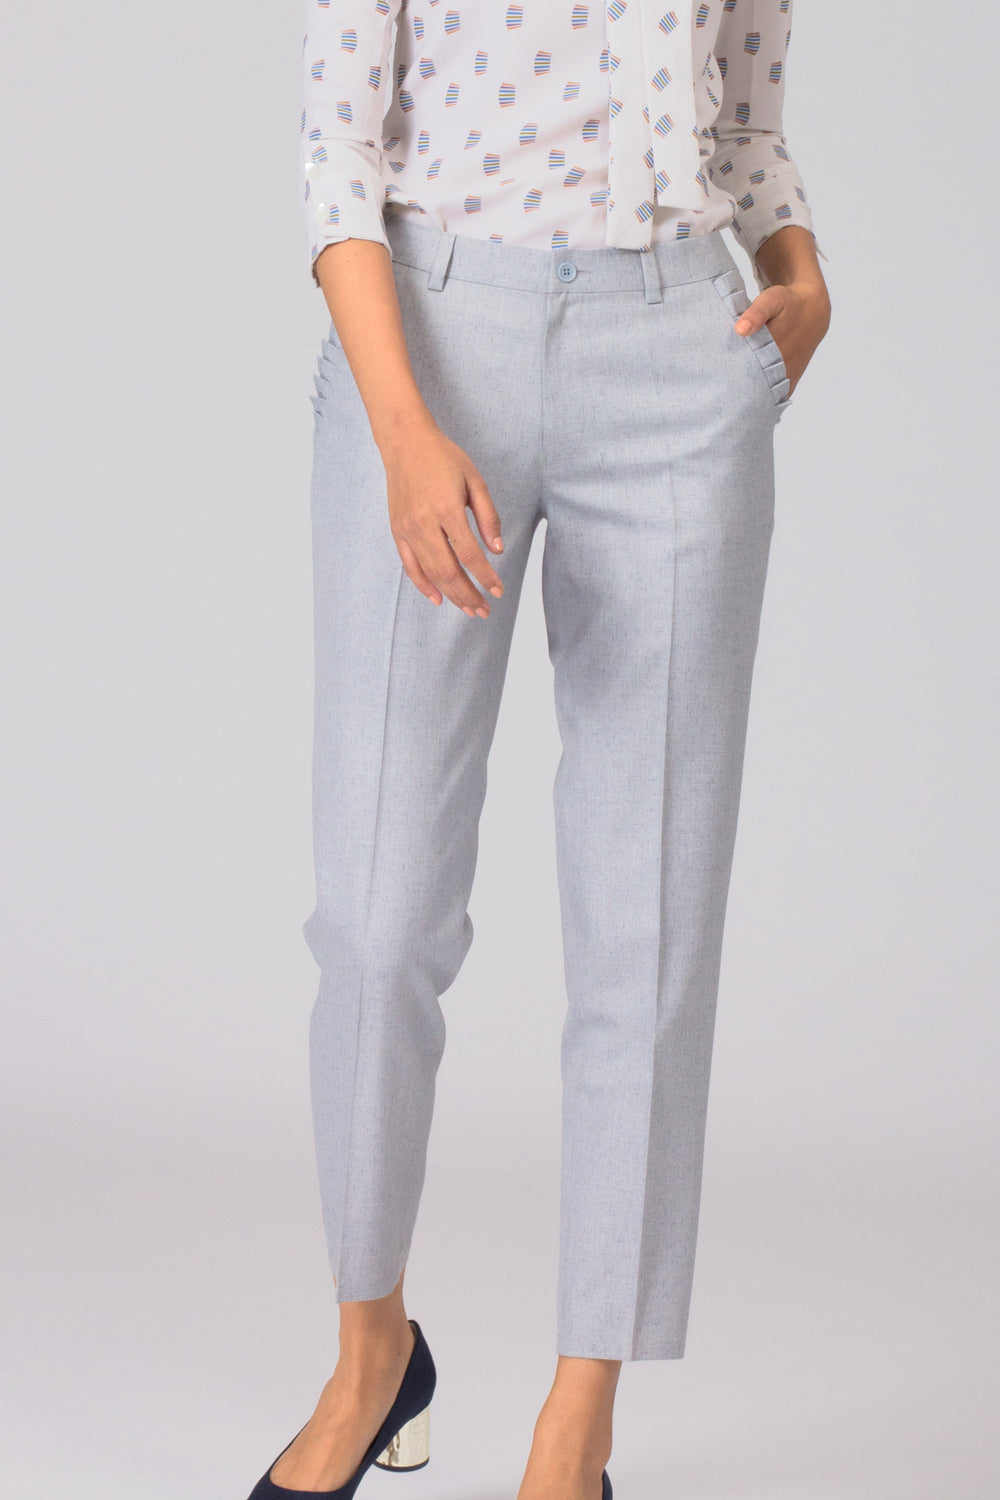 Smart and stylish women's formal pants and trousers for office. Shop online for formal trousers and pants at www.intermod.in